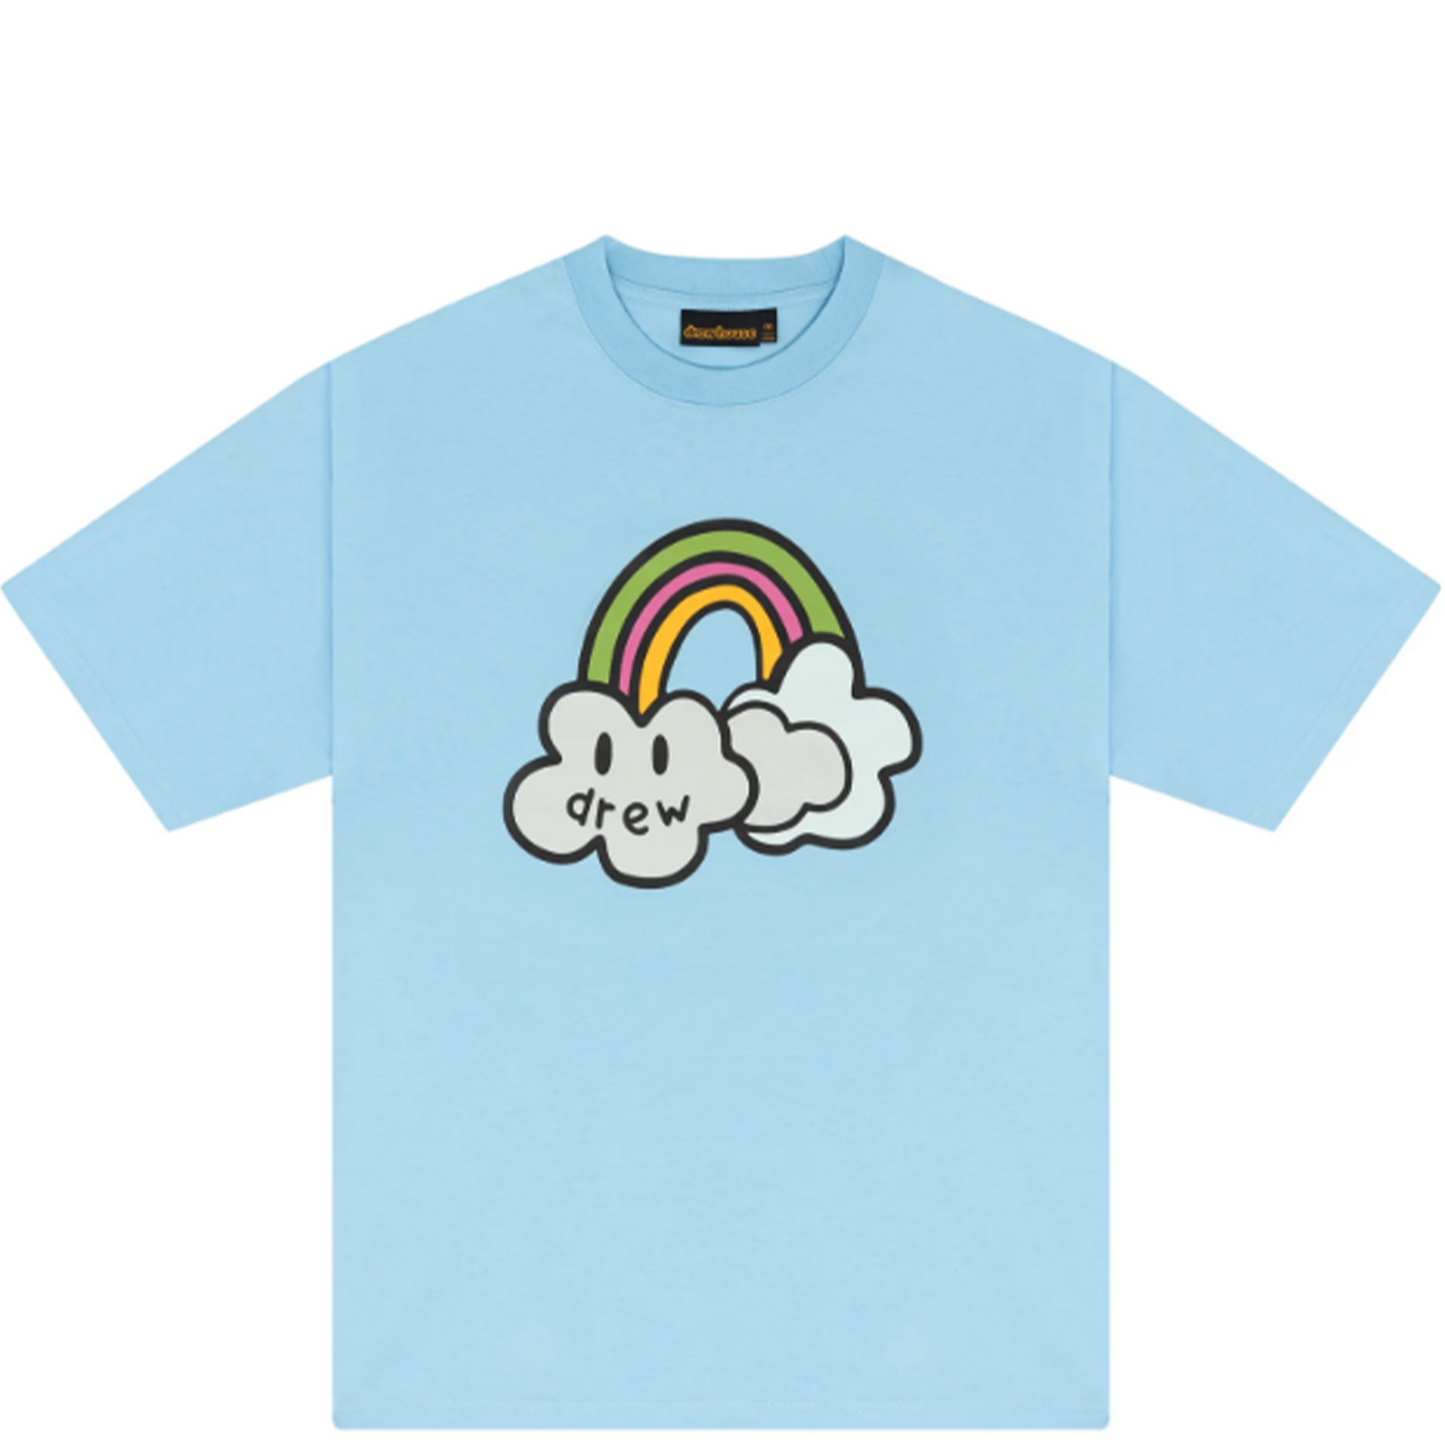 Drew House Bowie Tee Pacific Blue